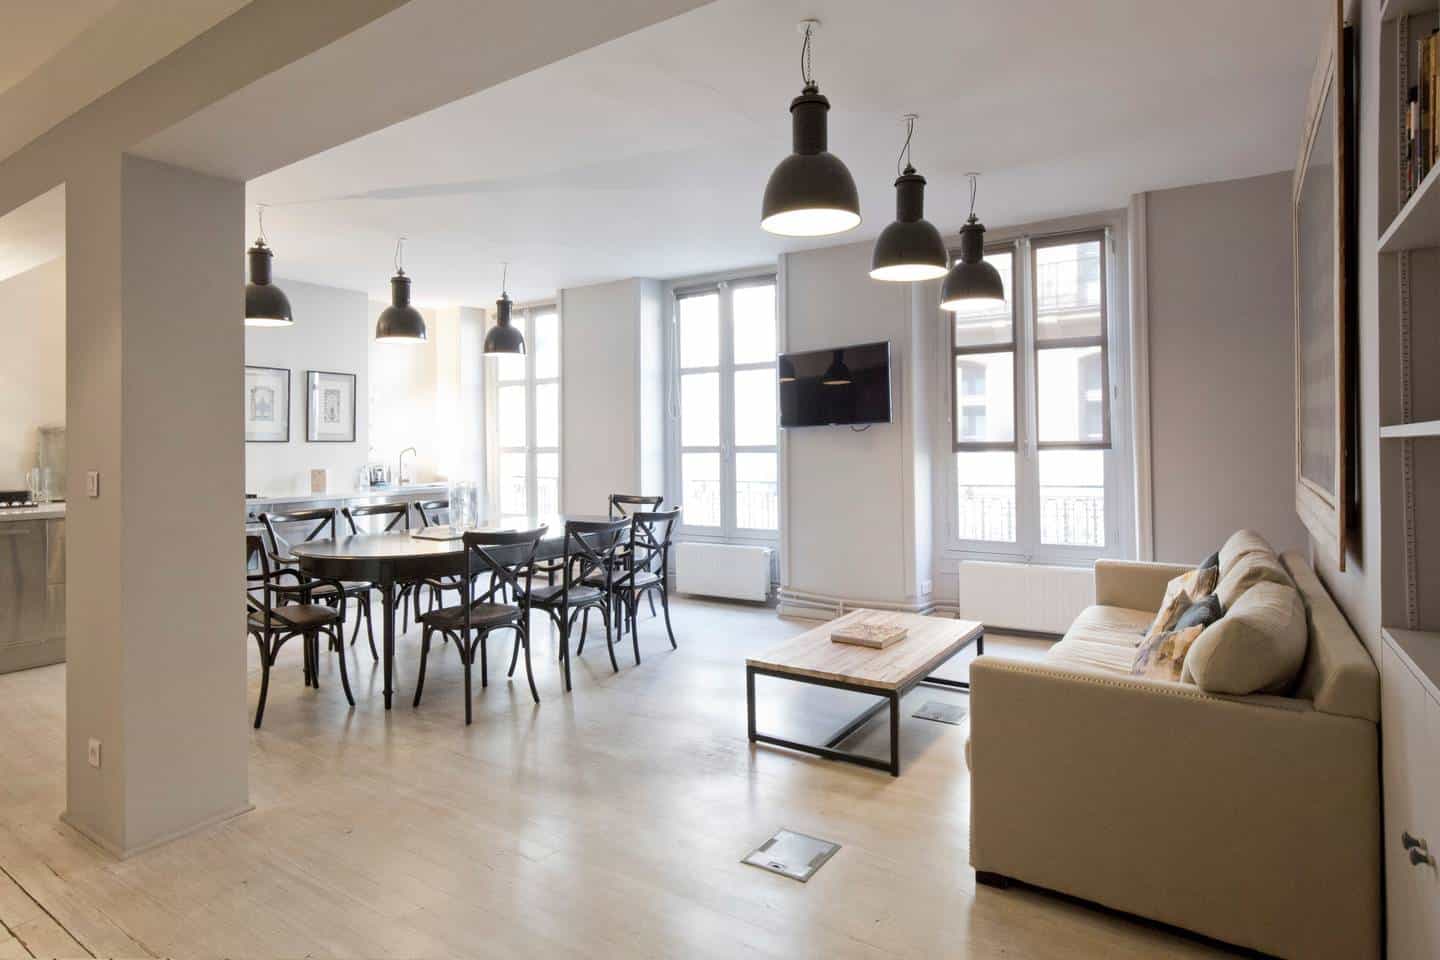 Wow! This Airbnb Paris listing near Concorde is dreamy. You have to see the pictures!